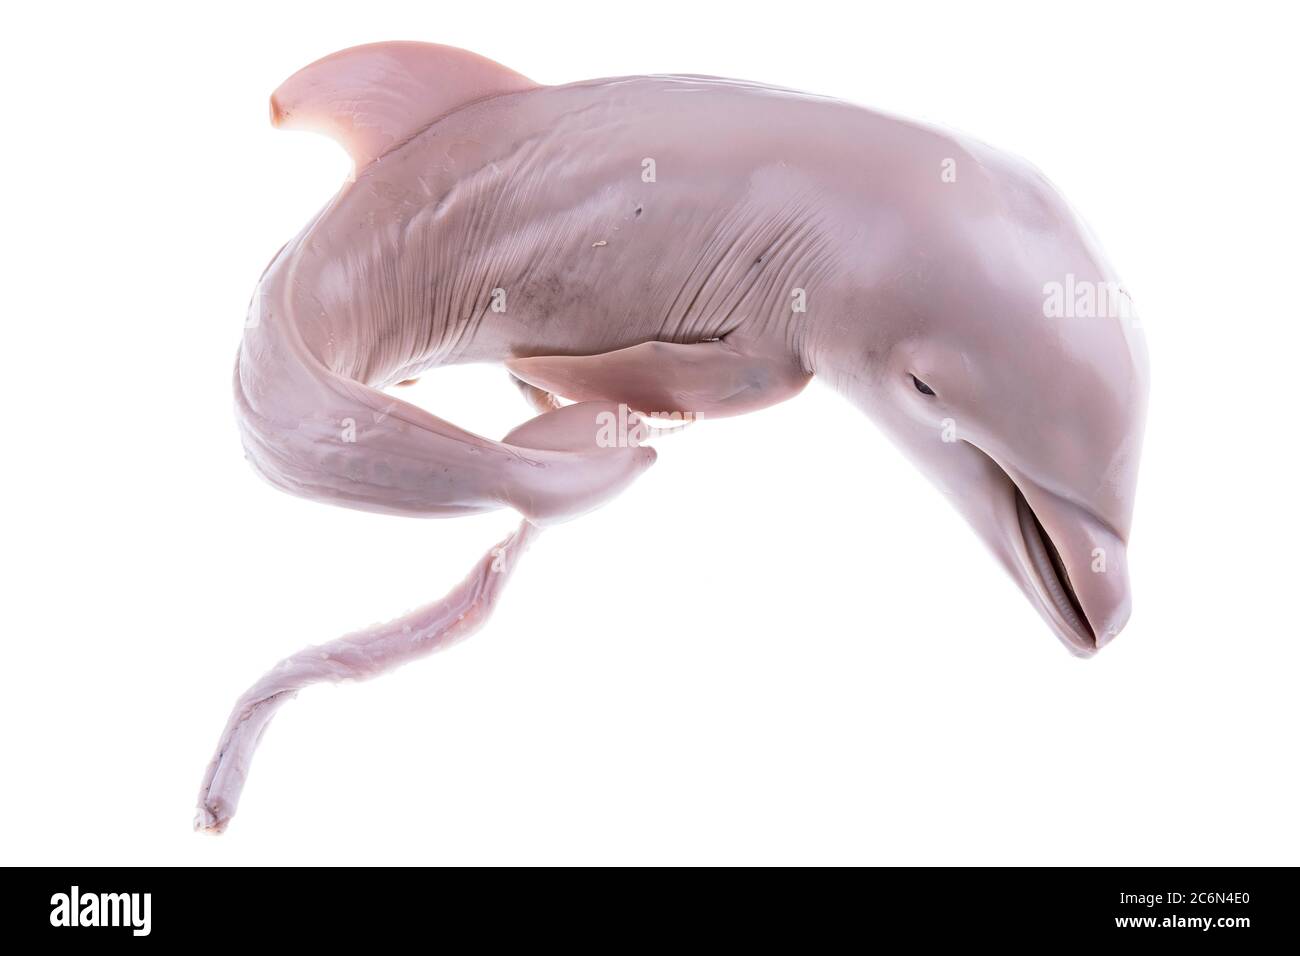 Dolphine aborted embryo from the collection of the Spanish Institute of Oceanography of Malaga, Spain. Stock Photo